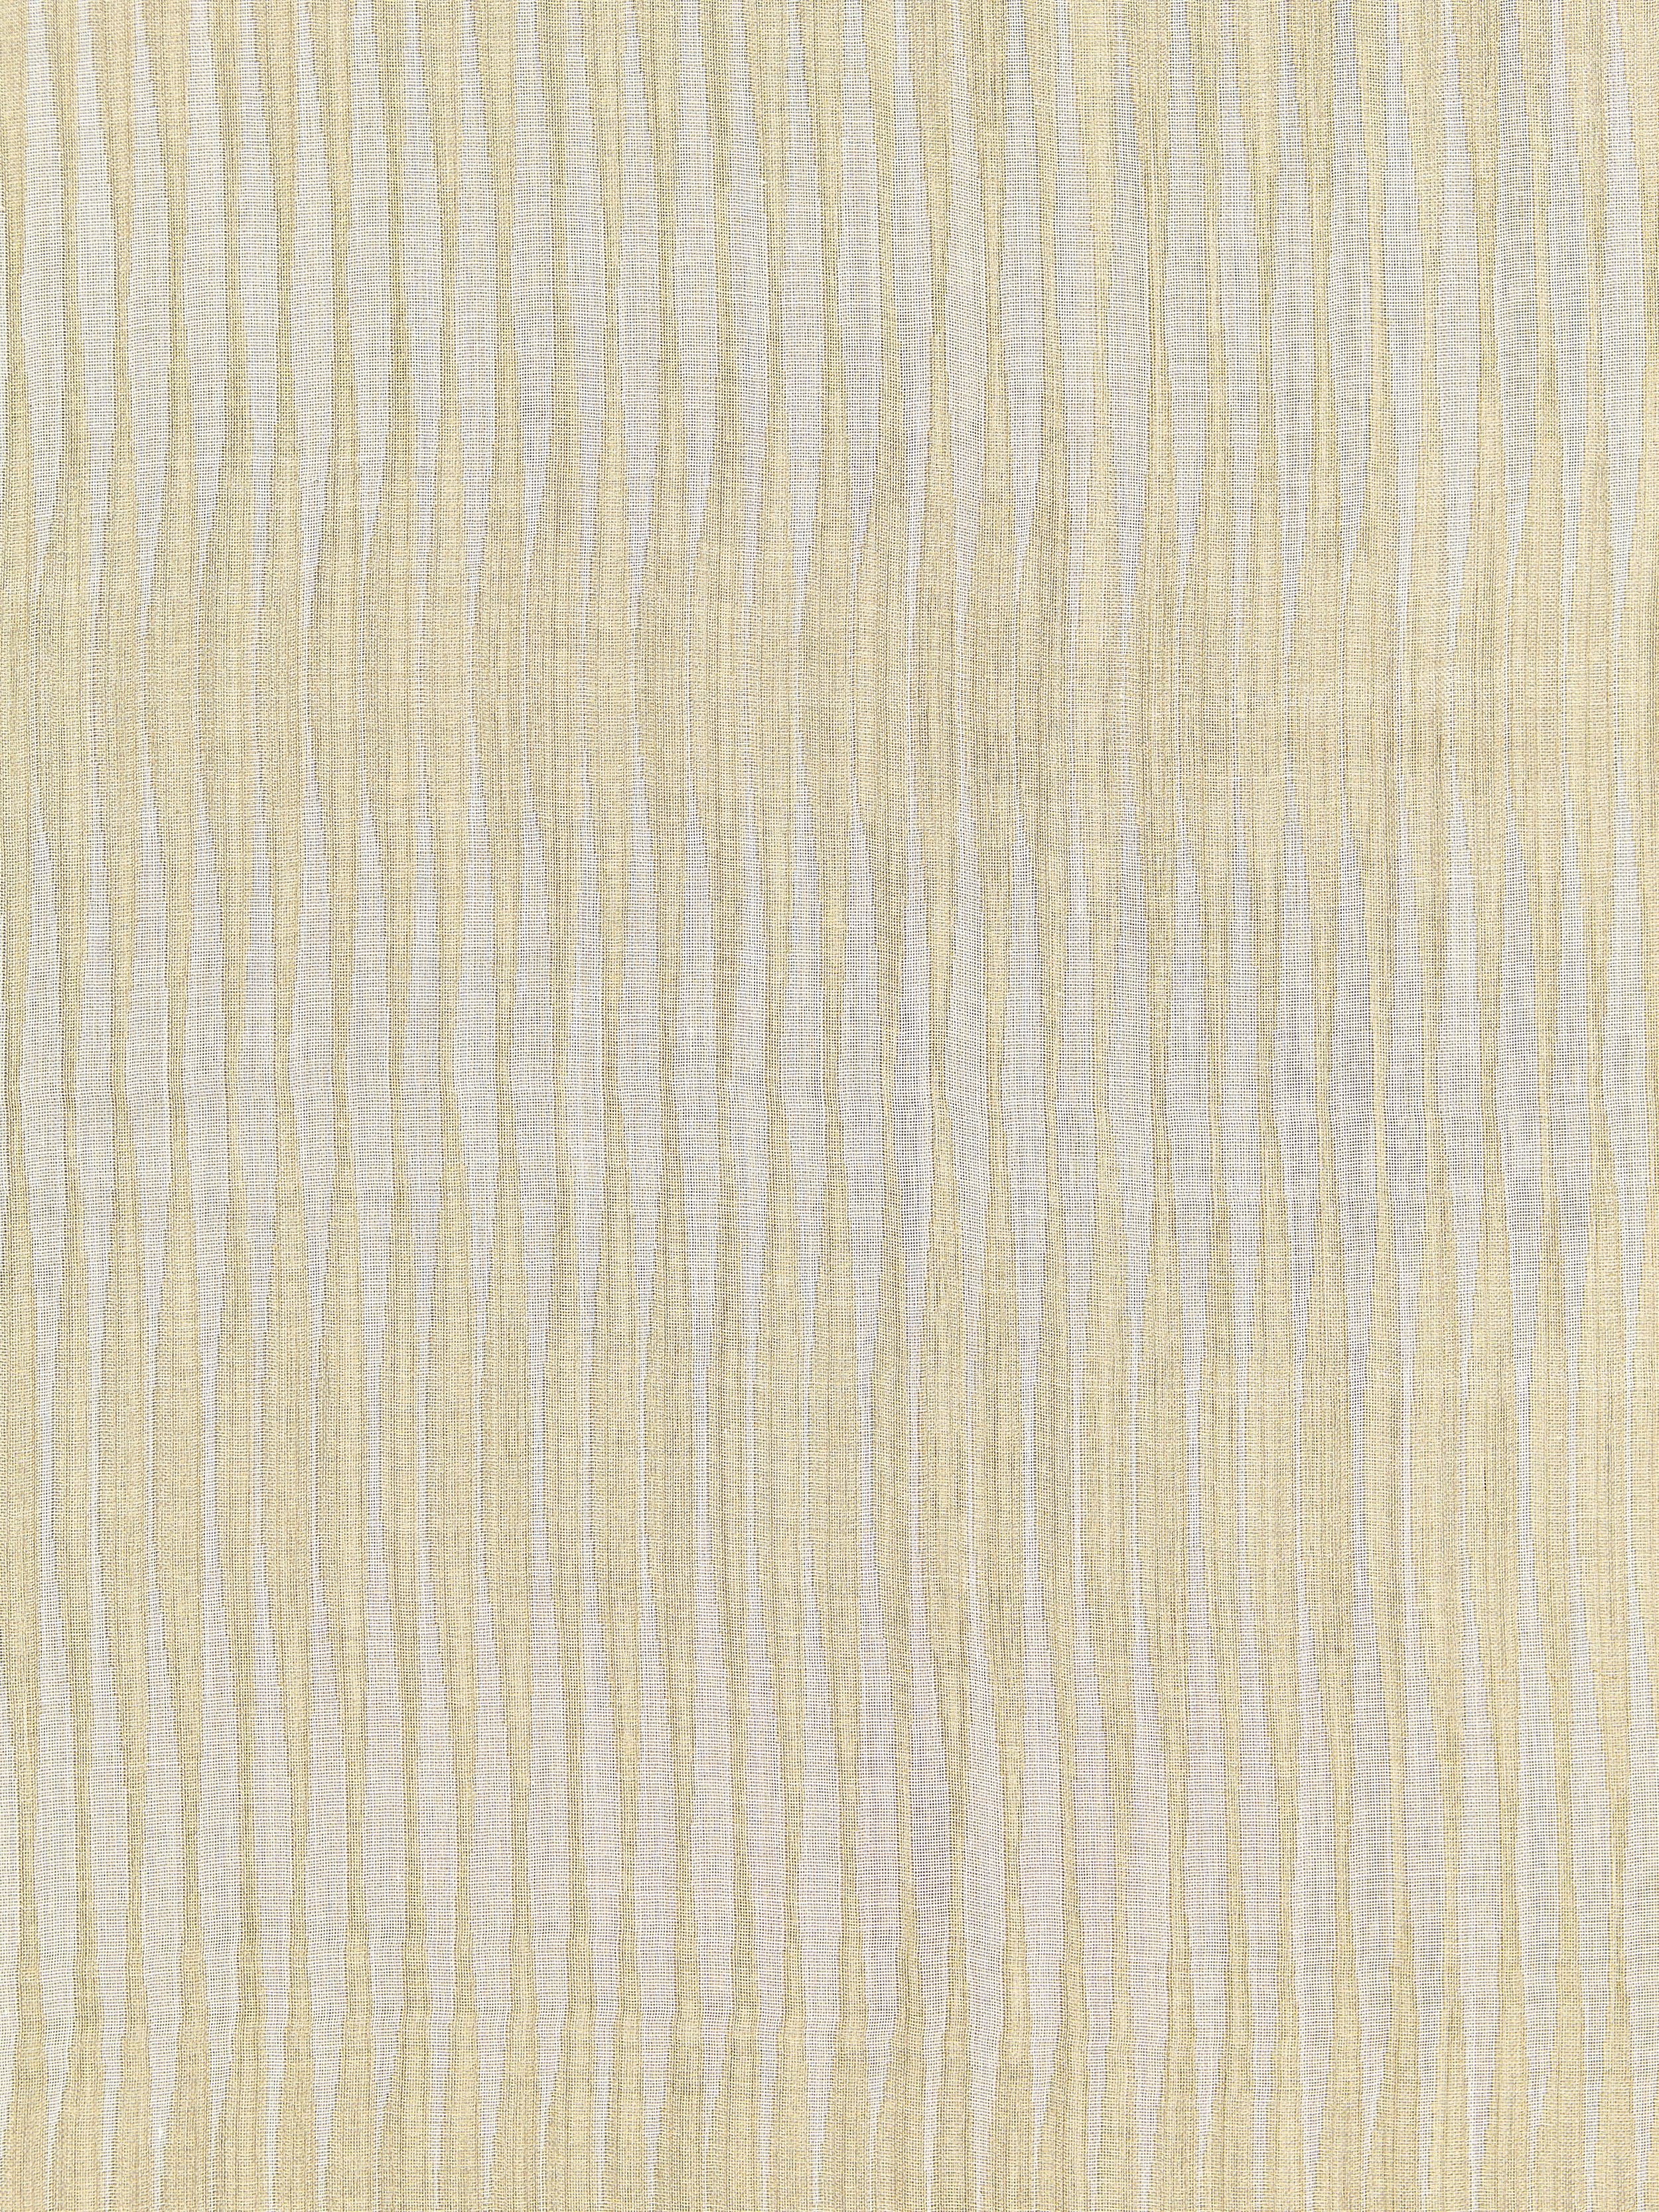 Aurora Sheer fabric in gold color - pattern number SC 000227055 - by Scalamandre in the Scalamandre Fabrics Book 1 collection